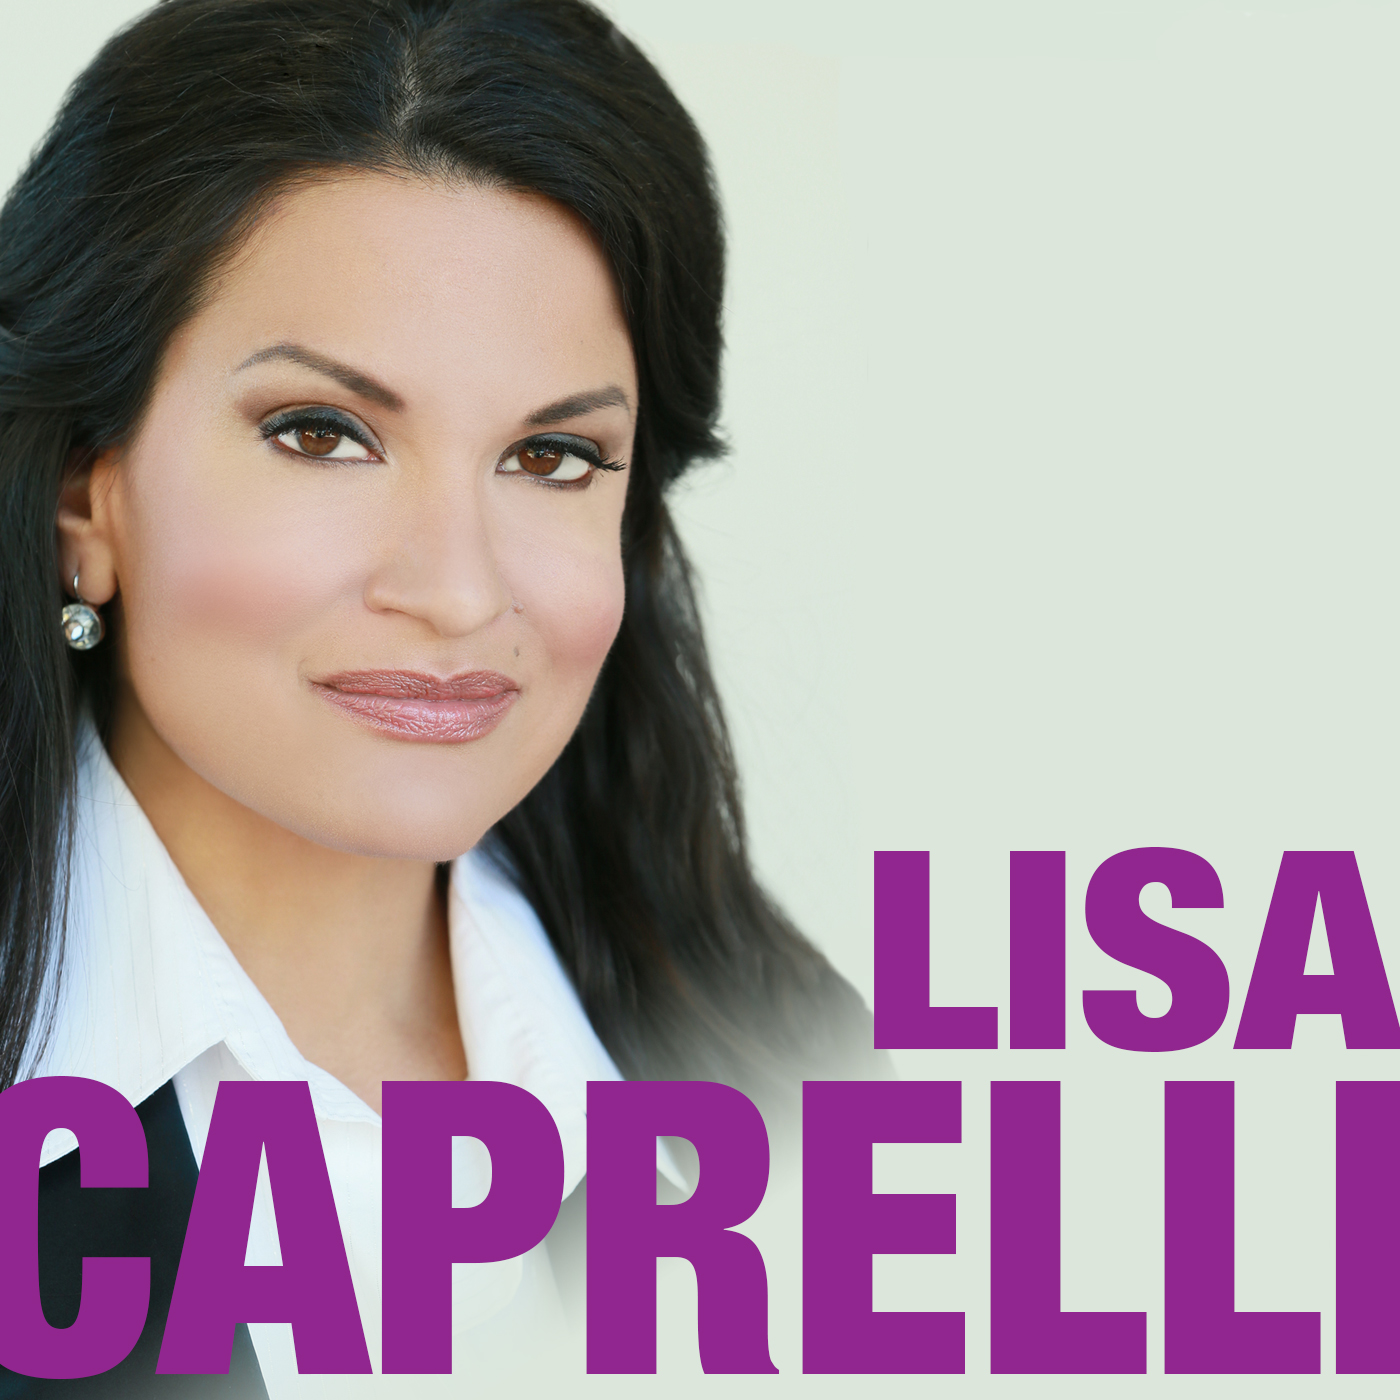 LIP 029: Never Stop Dreaming with Marketing and Branding Expert Lisa Caprelli